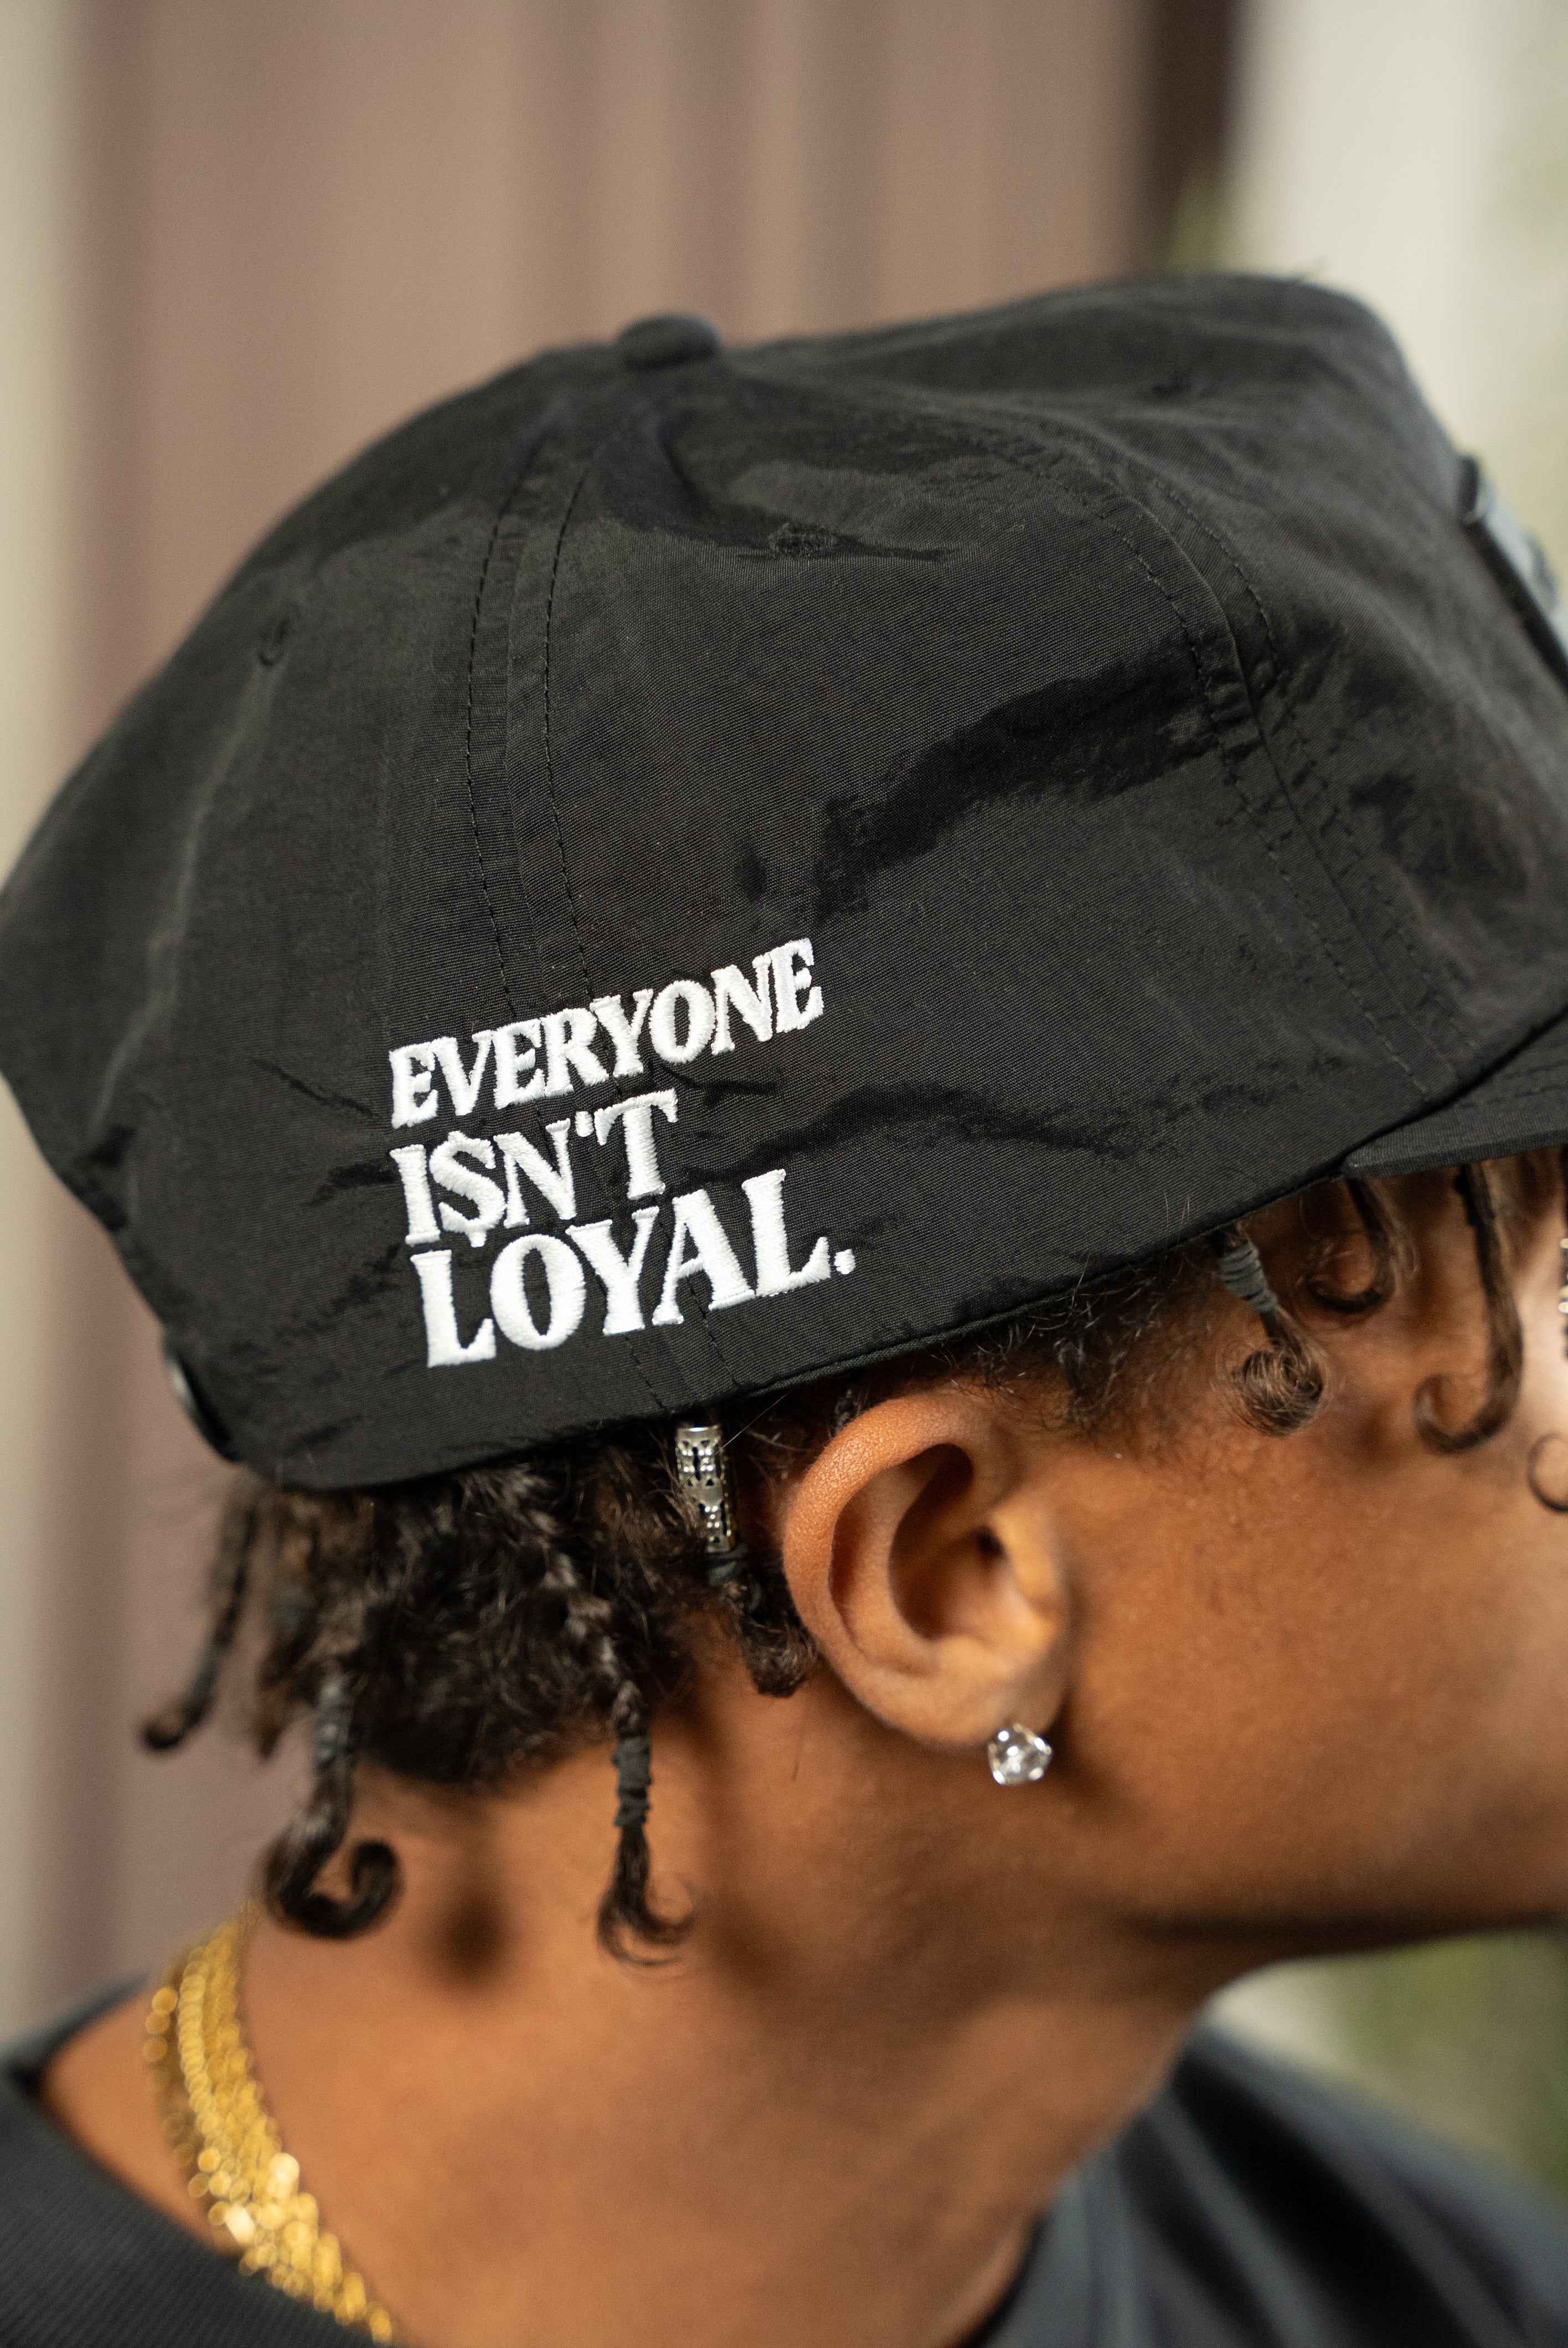 KNOW THY ENEMY DUO SNAPBACK